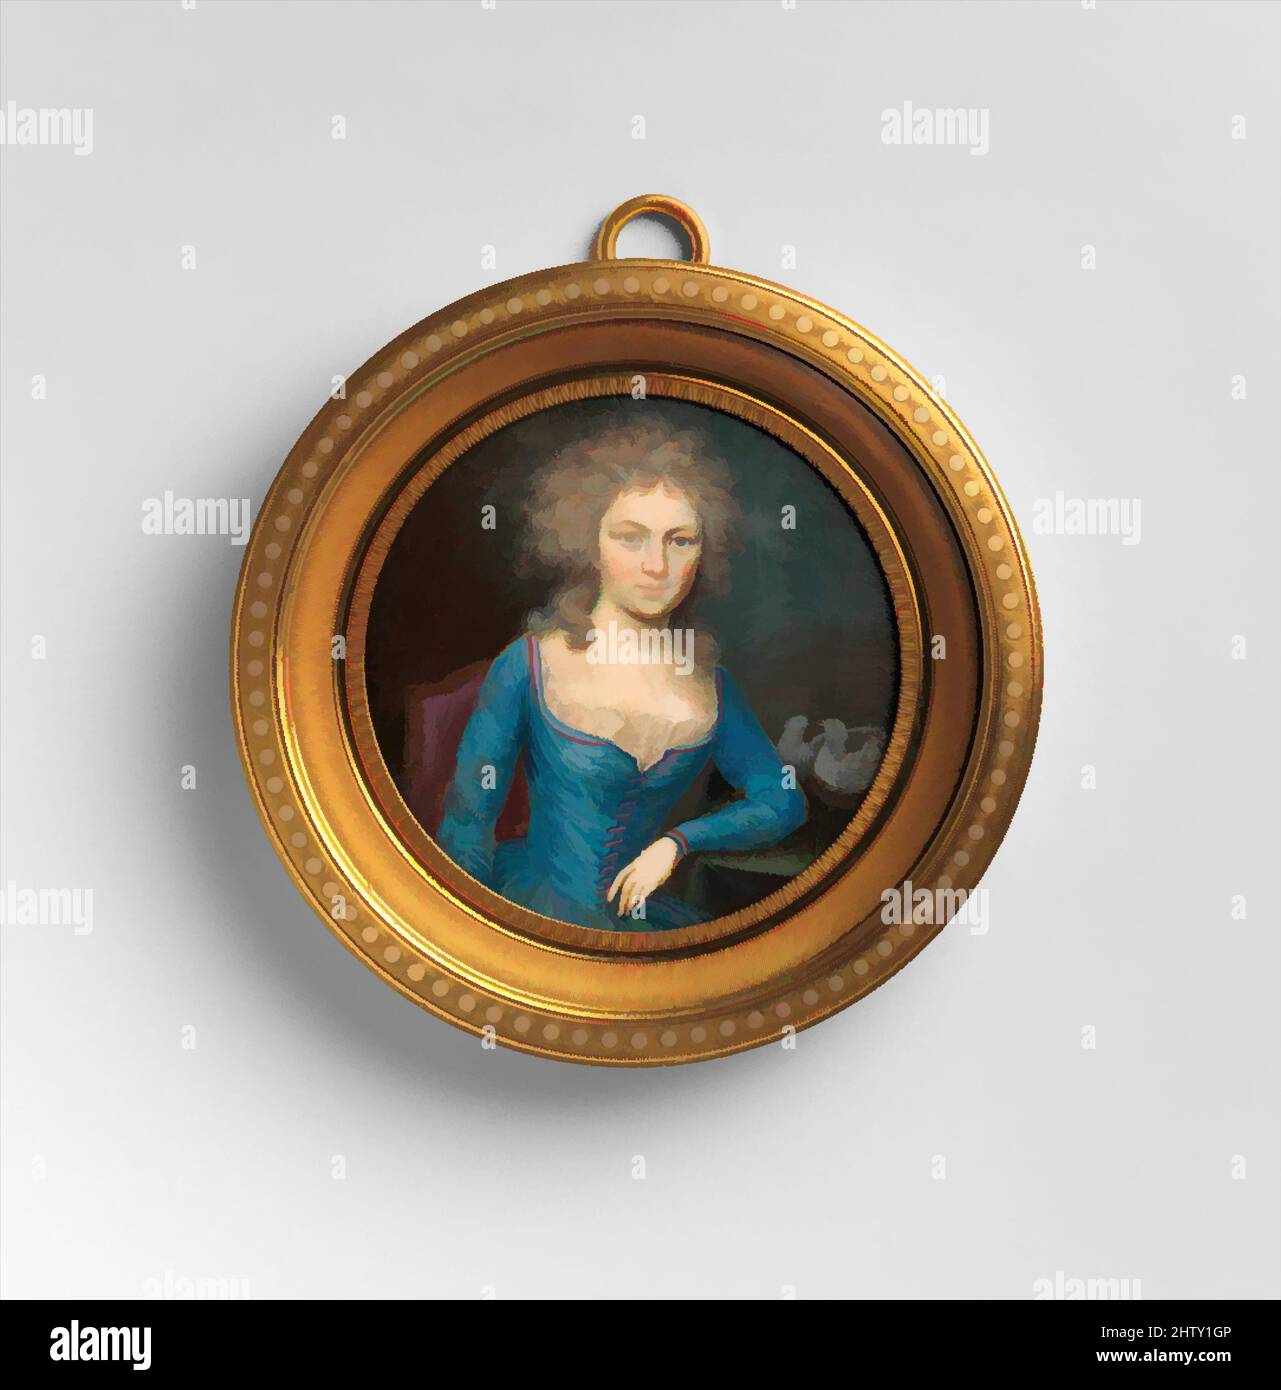 Art inspired by Portrait of a Woman, Ivory, Diameter 2 1/2 in. (63 mm), Miniatures, French Painter (ca. 1795, Classic works modernized by Artotop with a splash of modernity. Shapes, color and value, eye-catching visual impact on art. Emotions through freedom of artworks in a contemporary way. A timeless message pursuing a wildly creative new direction. Artists turning to the digital medium and creating the Artotop NFT Stock Photo